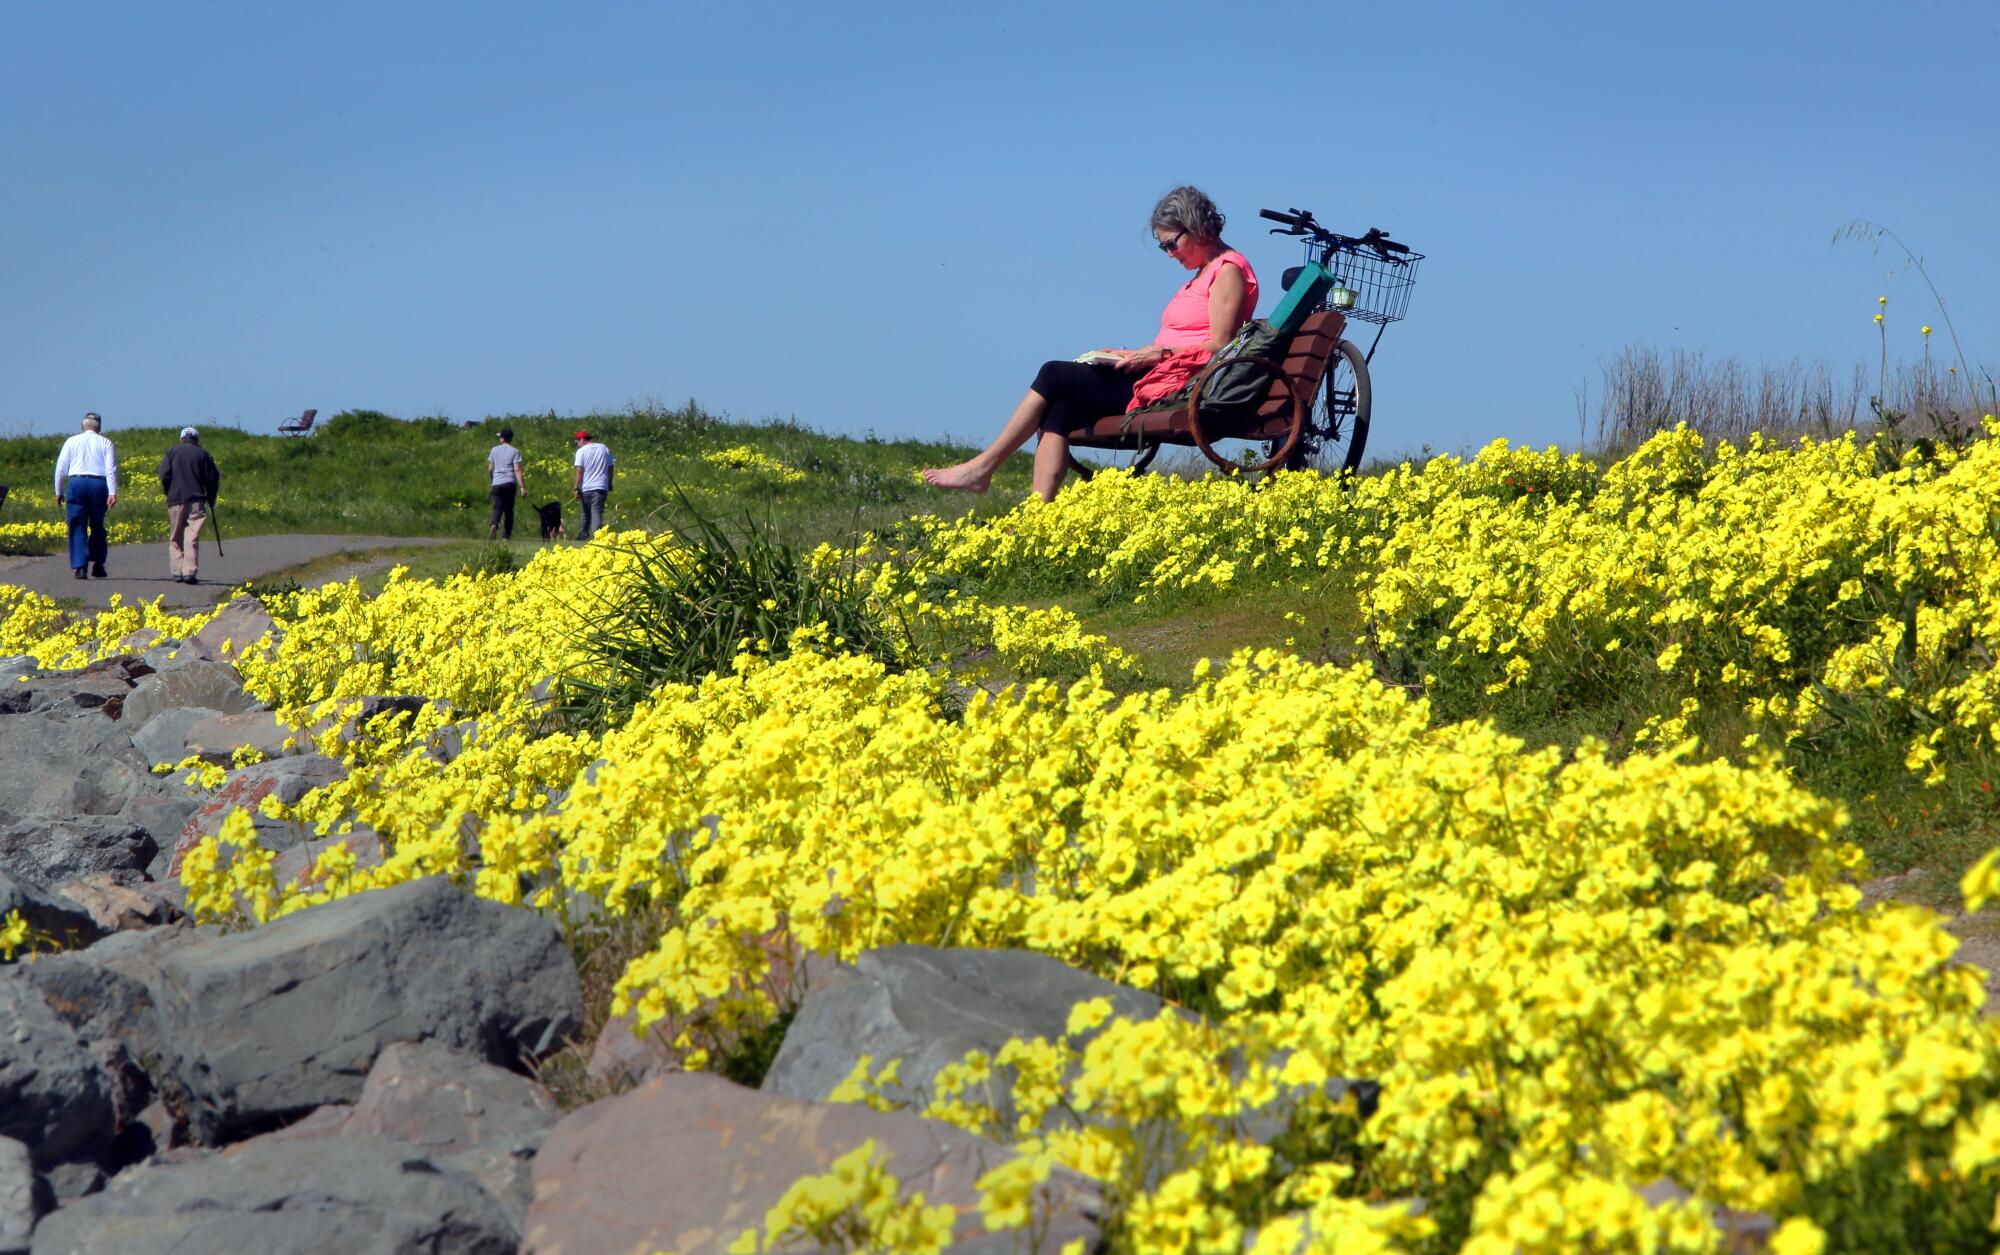 A woman sits on a park bench among yellow flowers.